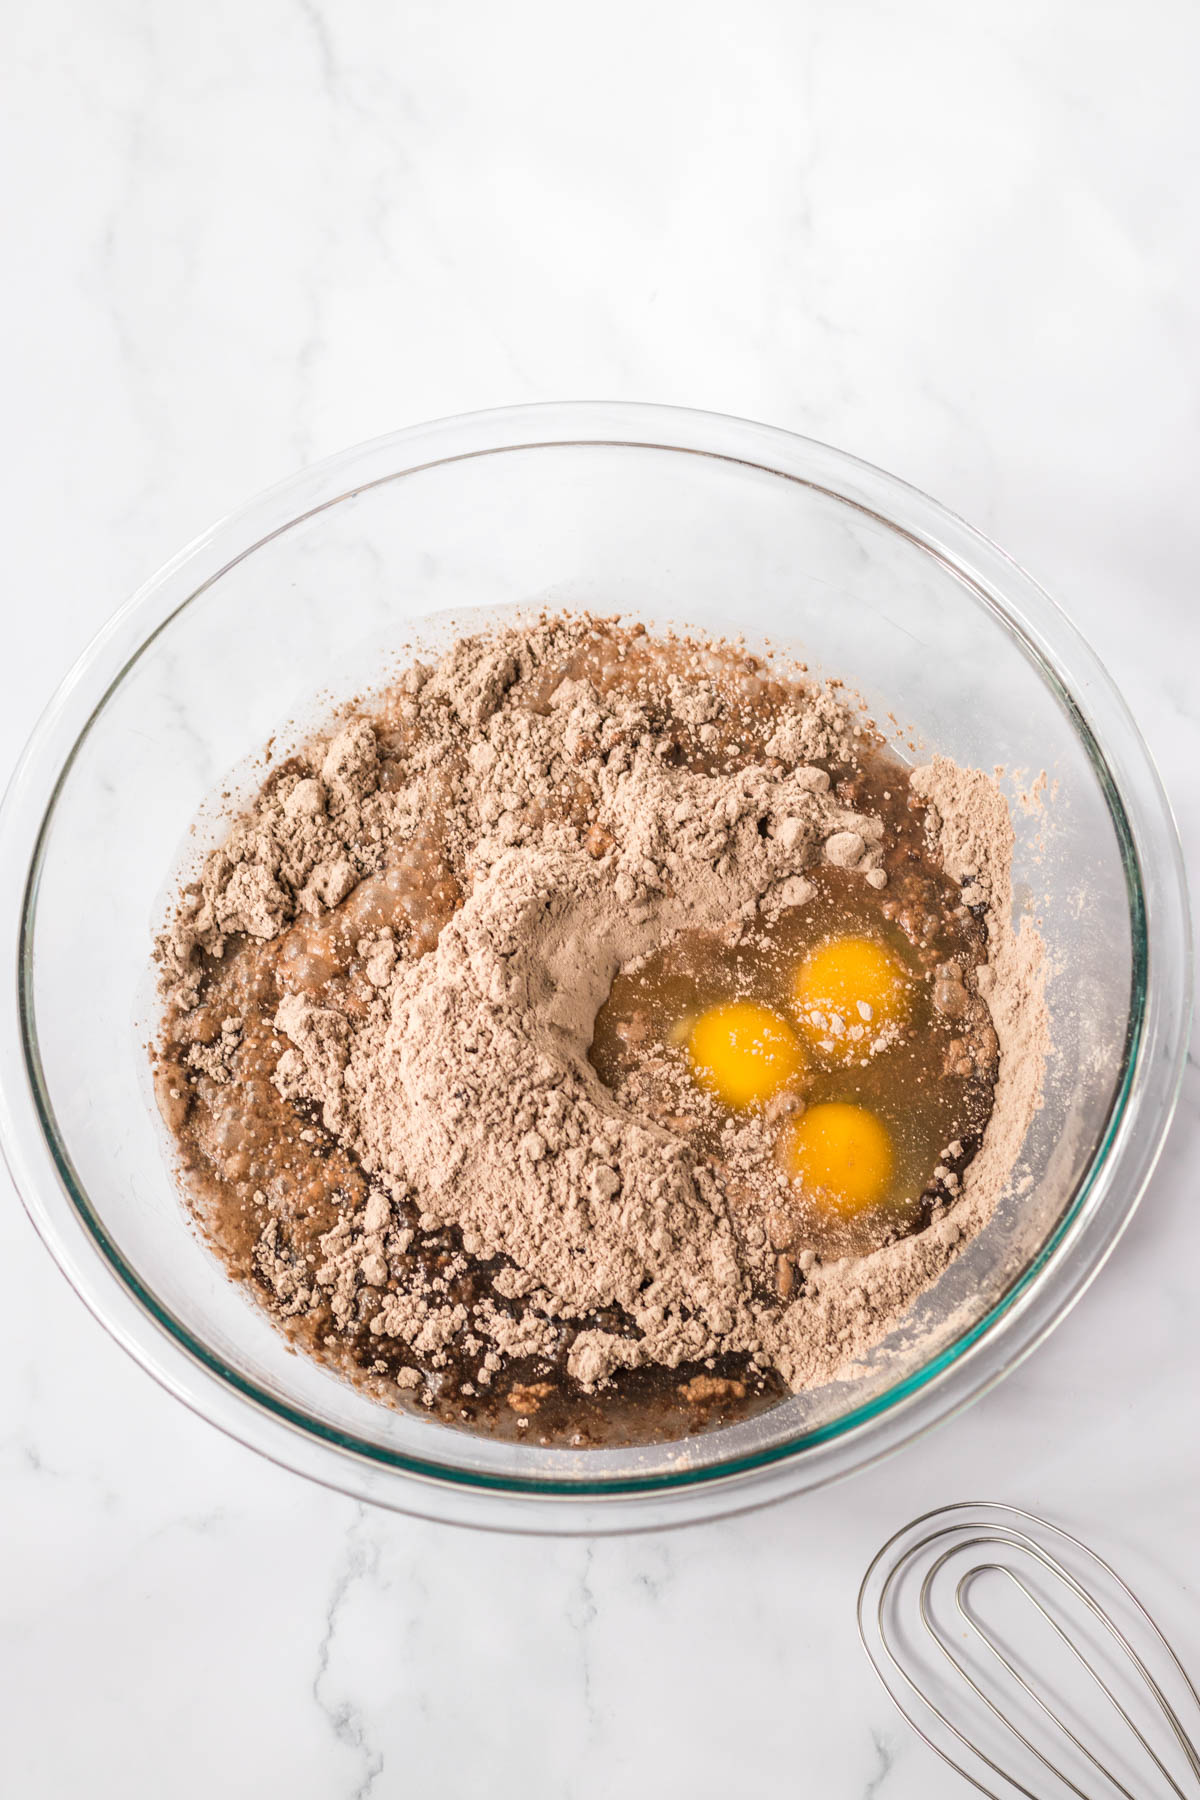 Cake mix with eggs and other ingredients